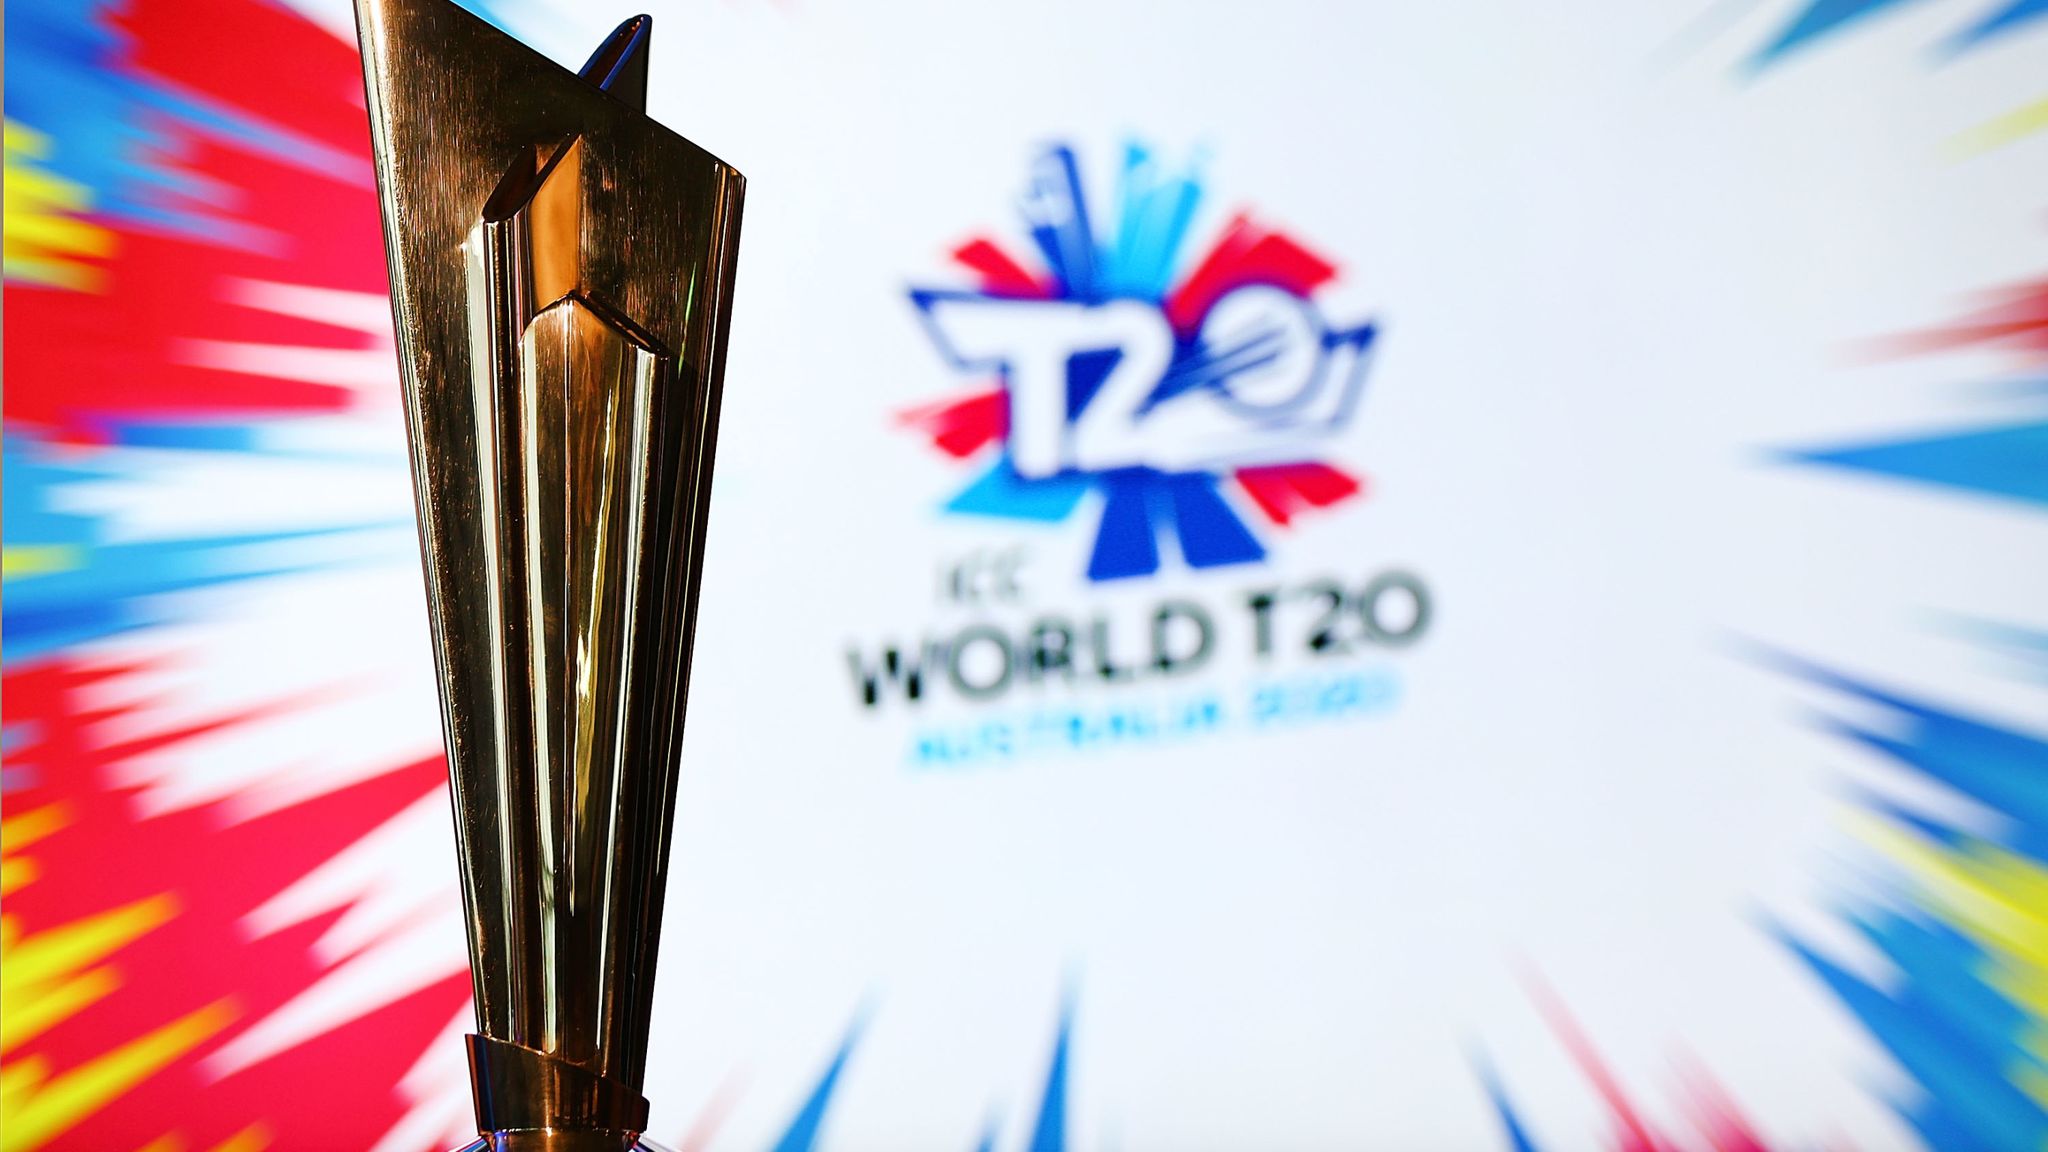 ICC T20 World Cup 2021 India As Per Things In Enhanced Squad Announcement Highlights